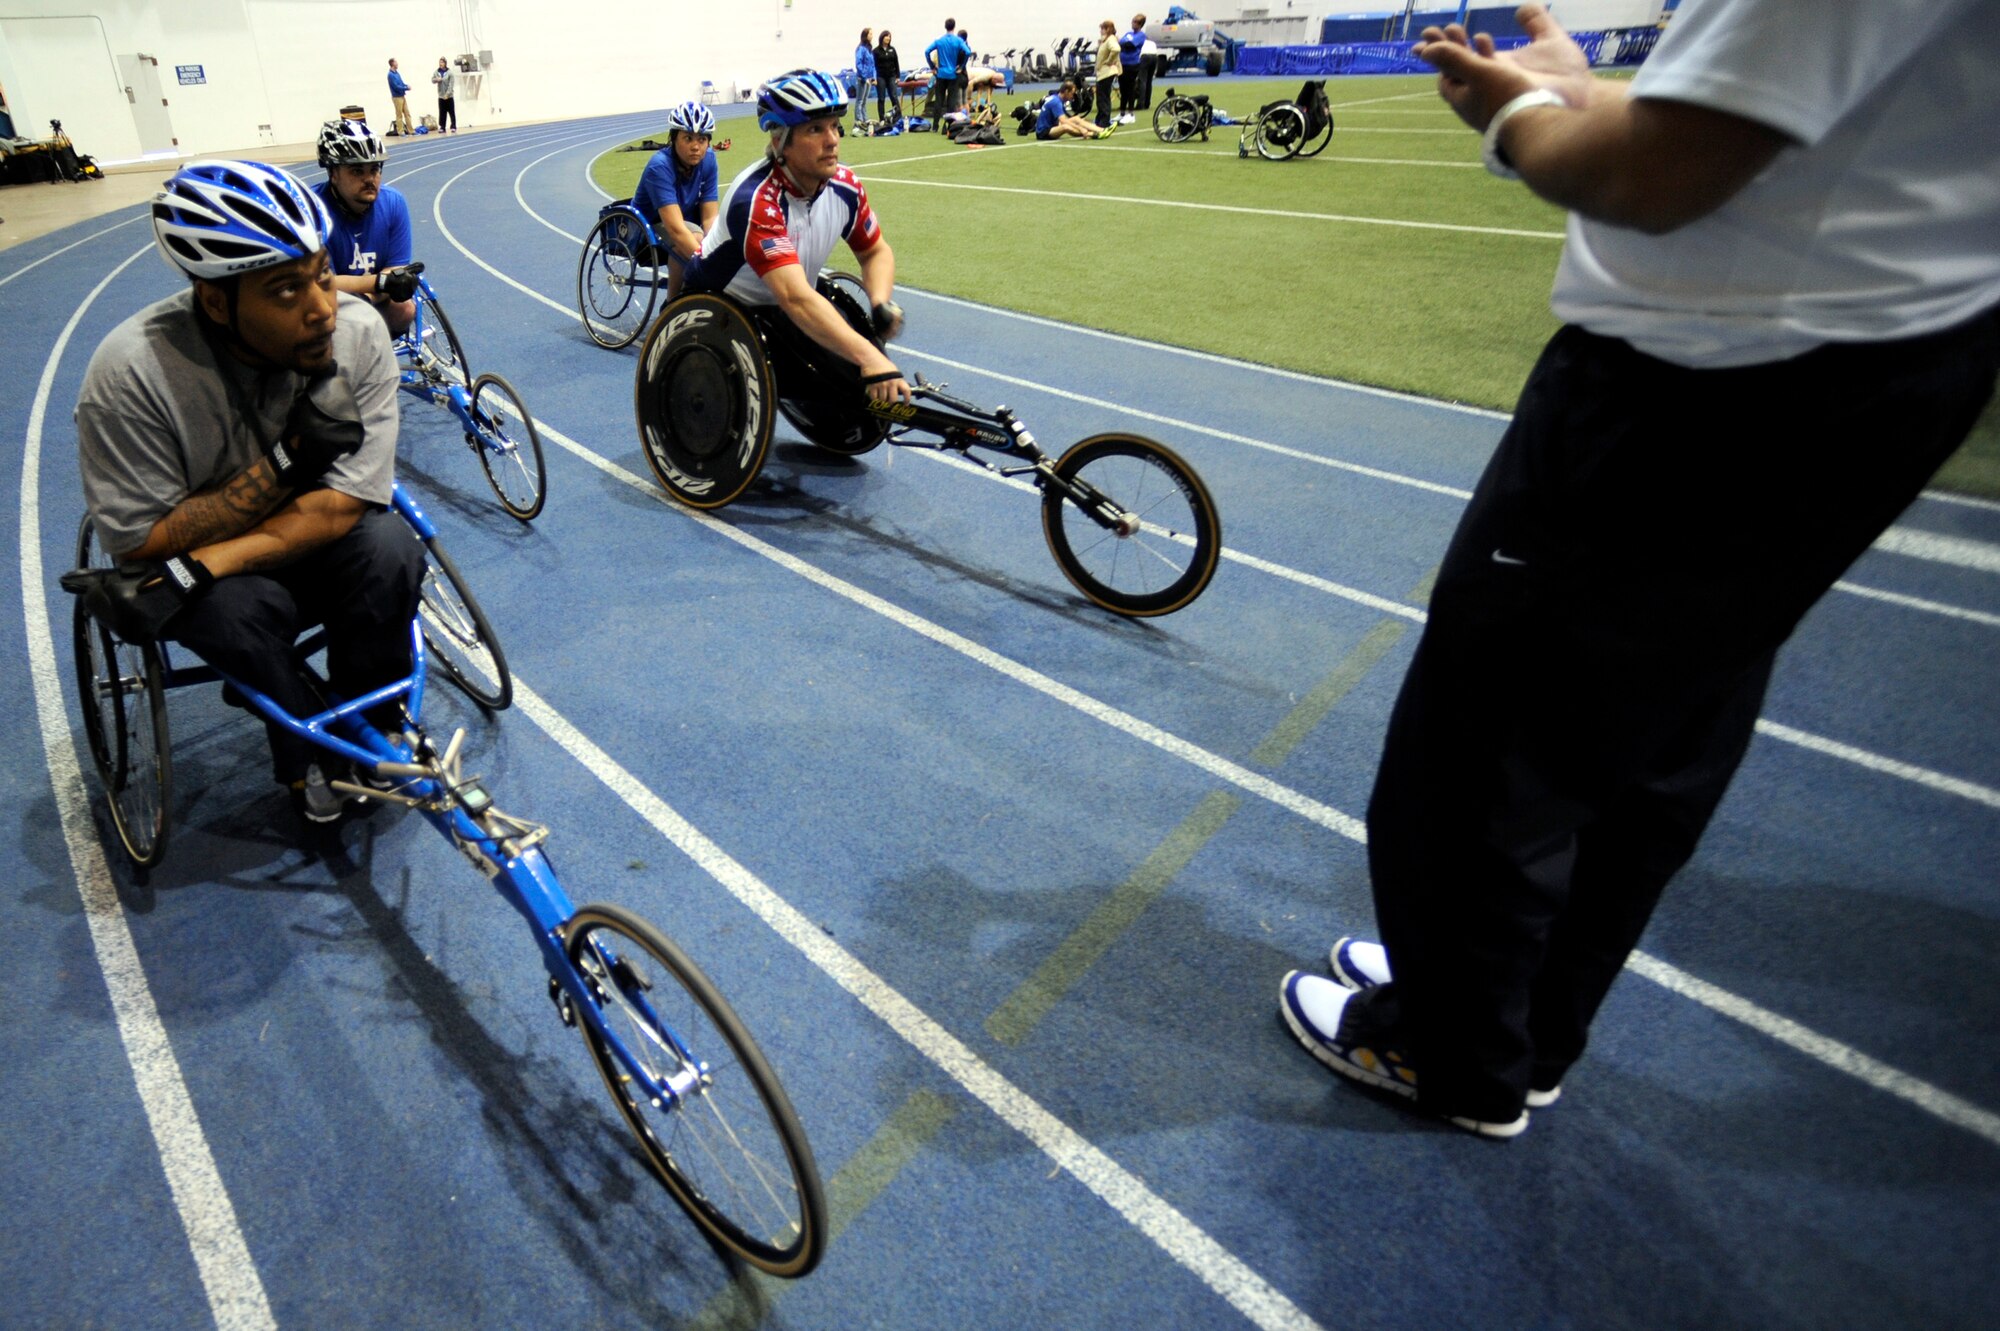 Former Senior Airman Darrell Fisher (left) and his fellow teammates listen to their coach before cycle practice at the U.S. Air Force Academy indoor track during the Air Force's Warrior Games training camp  April 17, 2013, in Colorado Springs, Colo. Fisher served as a jet engine mechanic before he separated from the Air Force. (U.S. Air Force photo/Desiree Palacios)